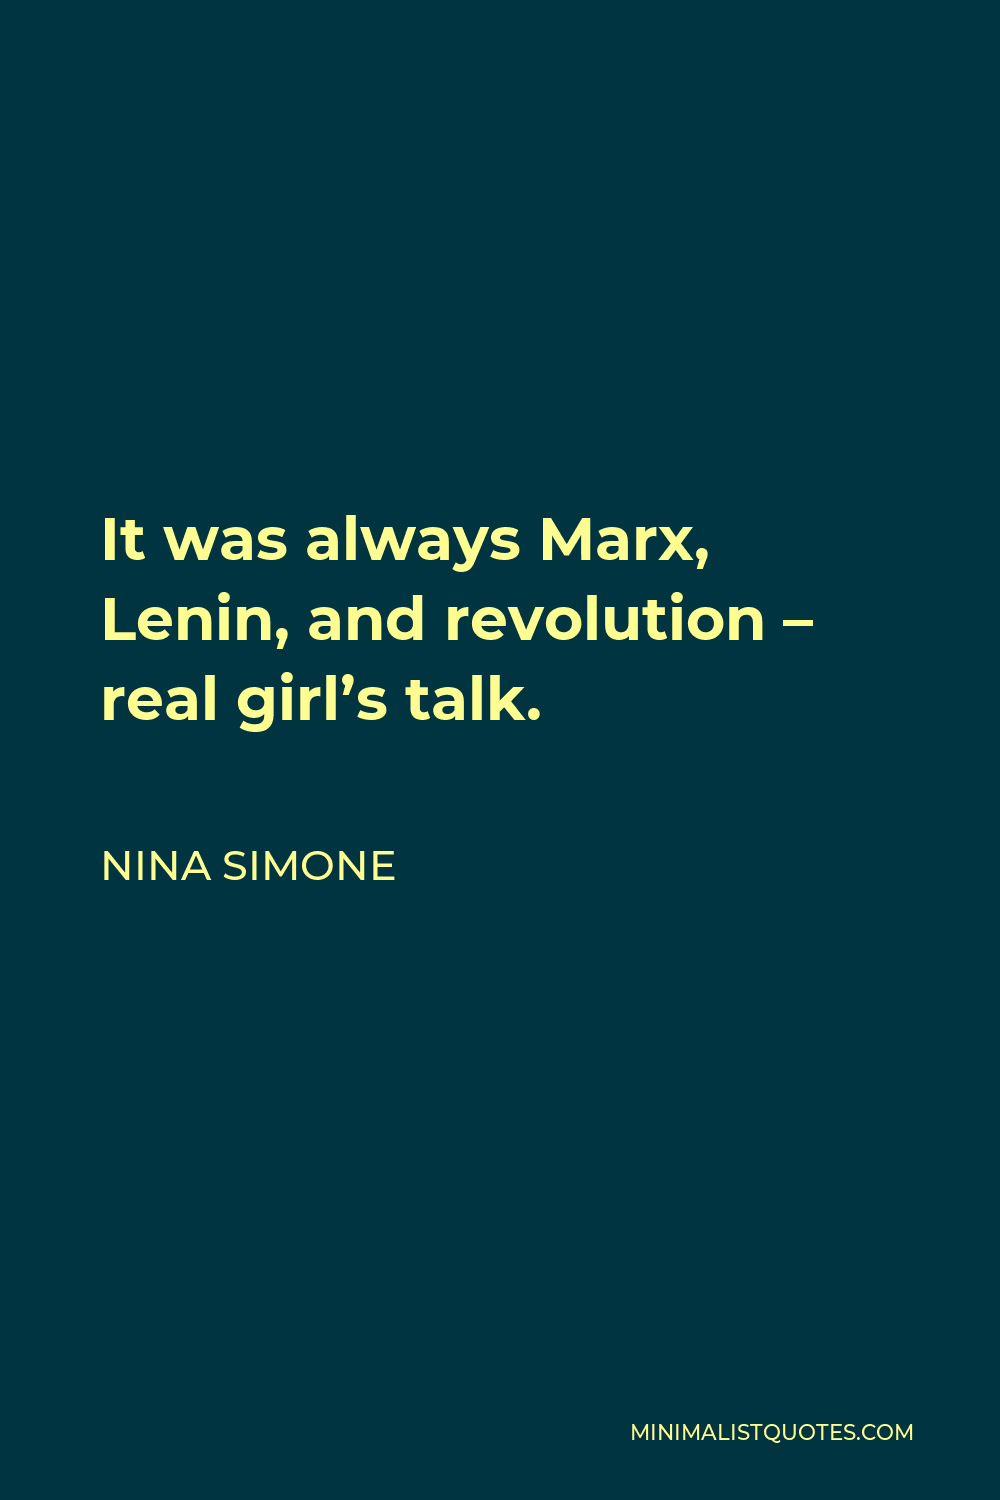 Nina Simone Quote - It was always Marx, Lenin, and revolution – real girl’s talk.